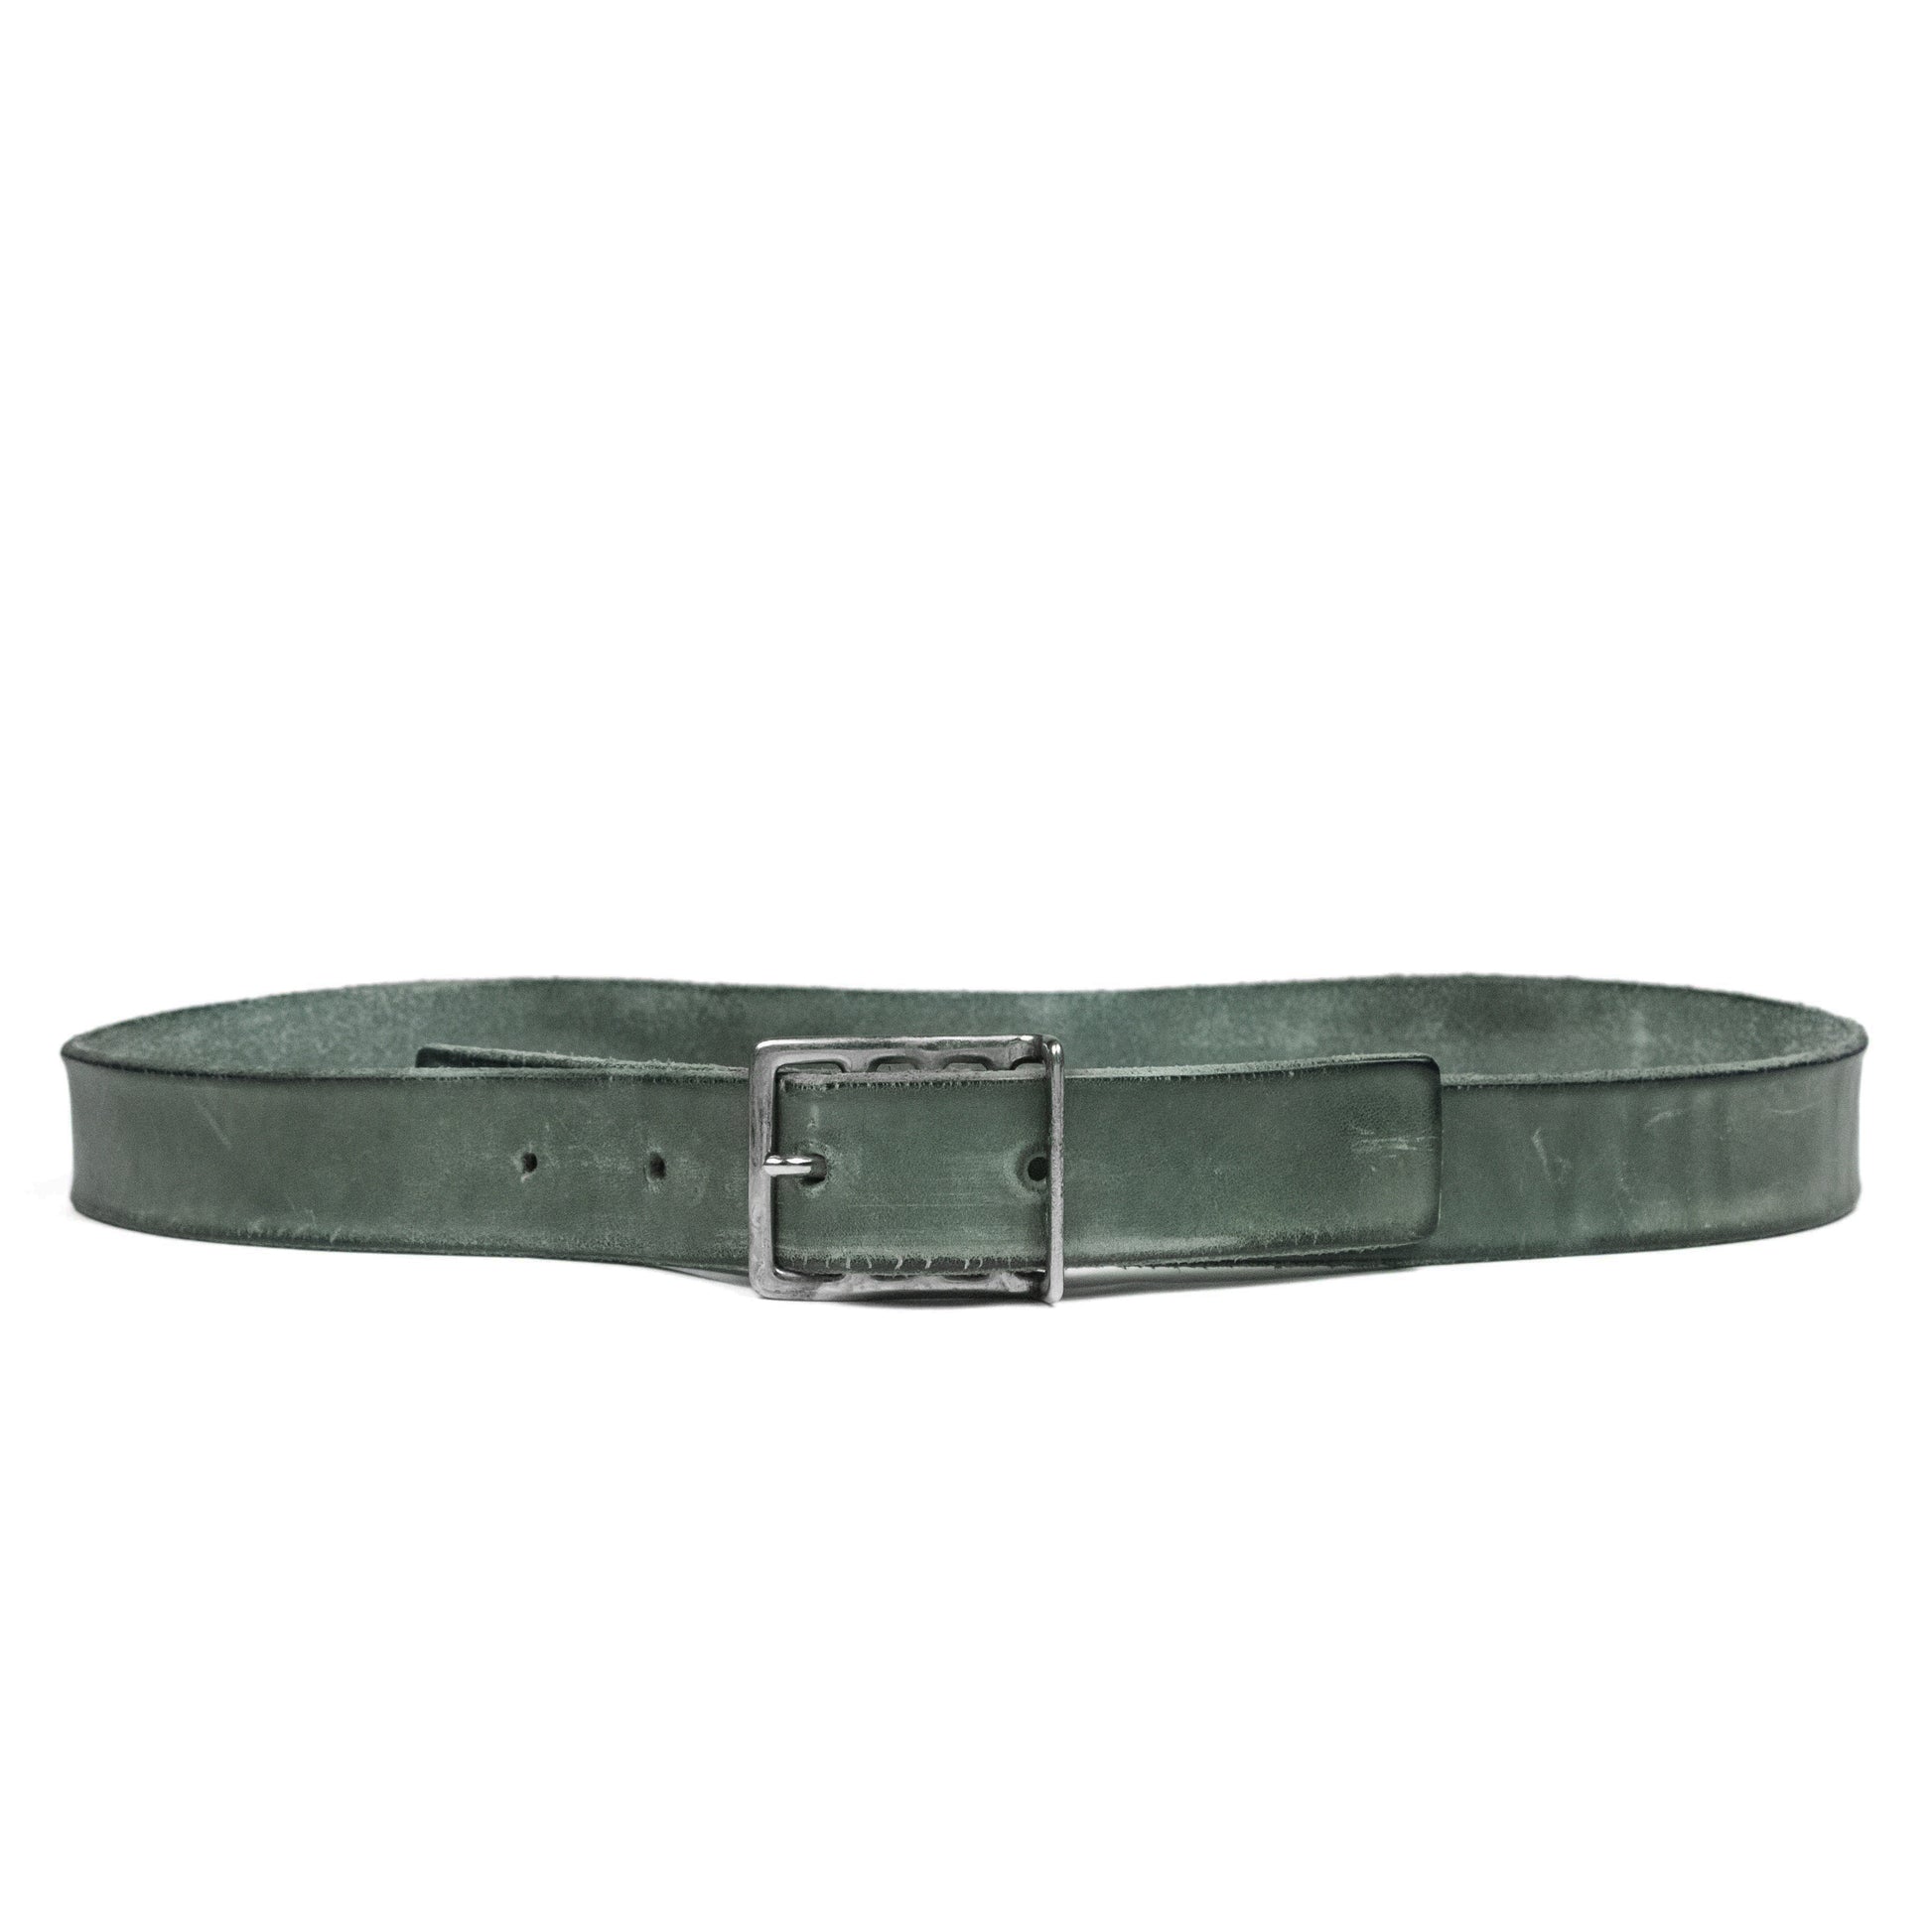 Carol Christian Poell Object Dyed Horse Leather Belt - SILVER LEAGUE